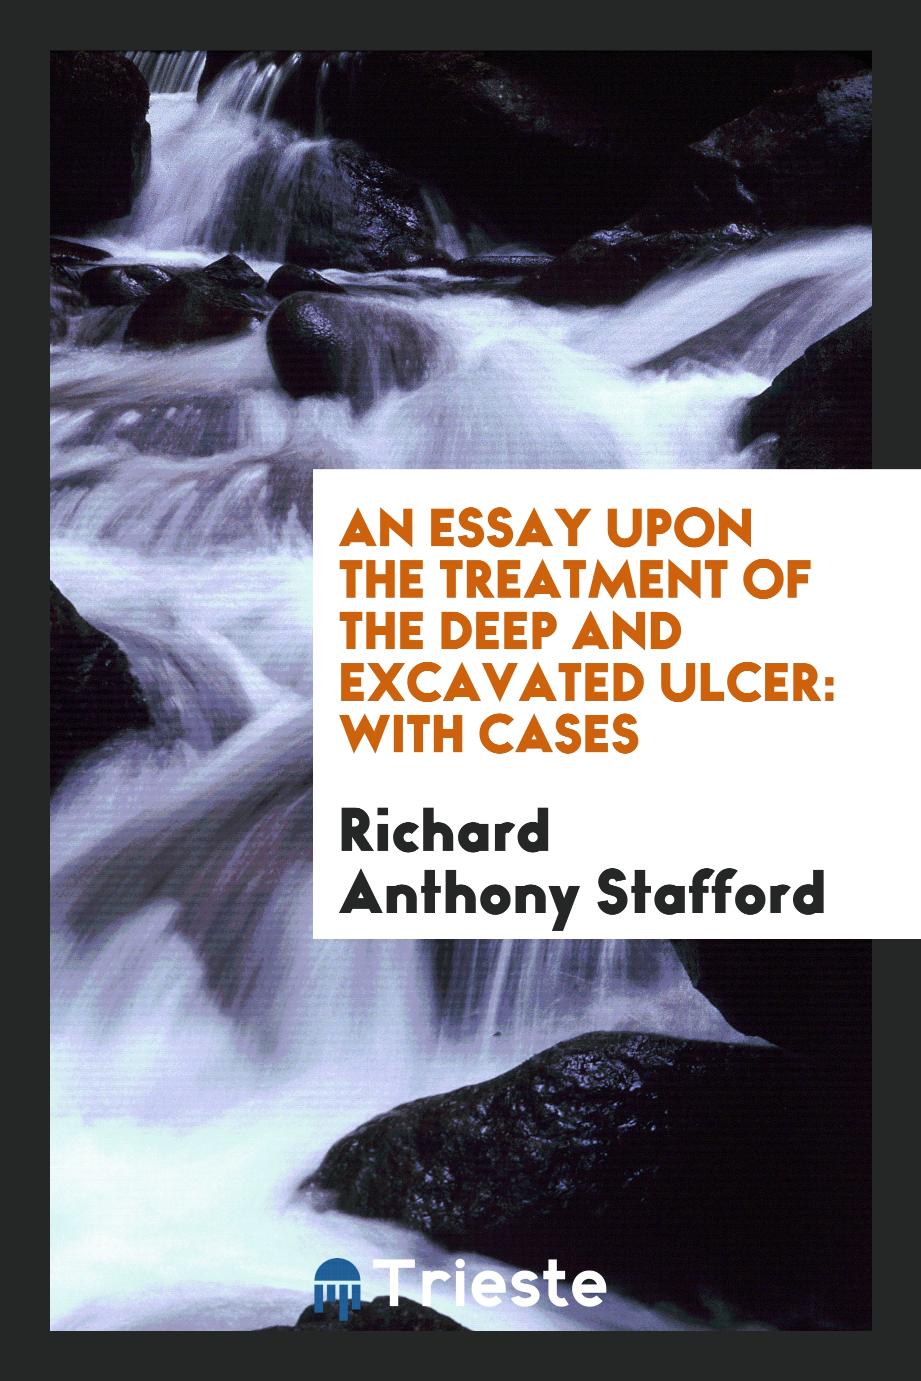 An essay upon the treatment of the deep and excavated ulcer: with cases